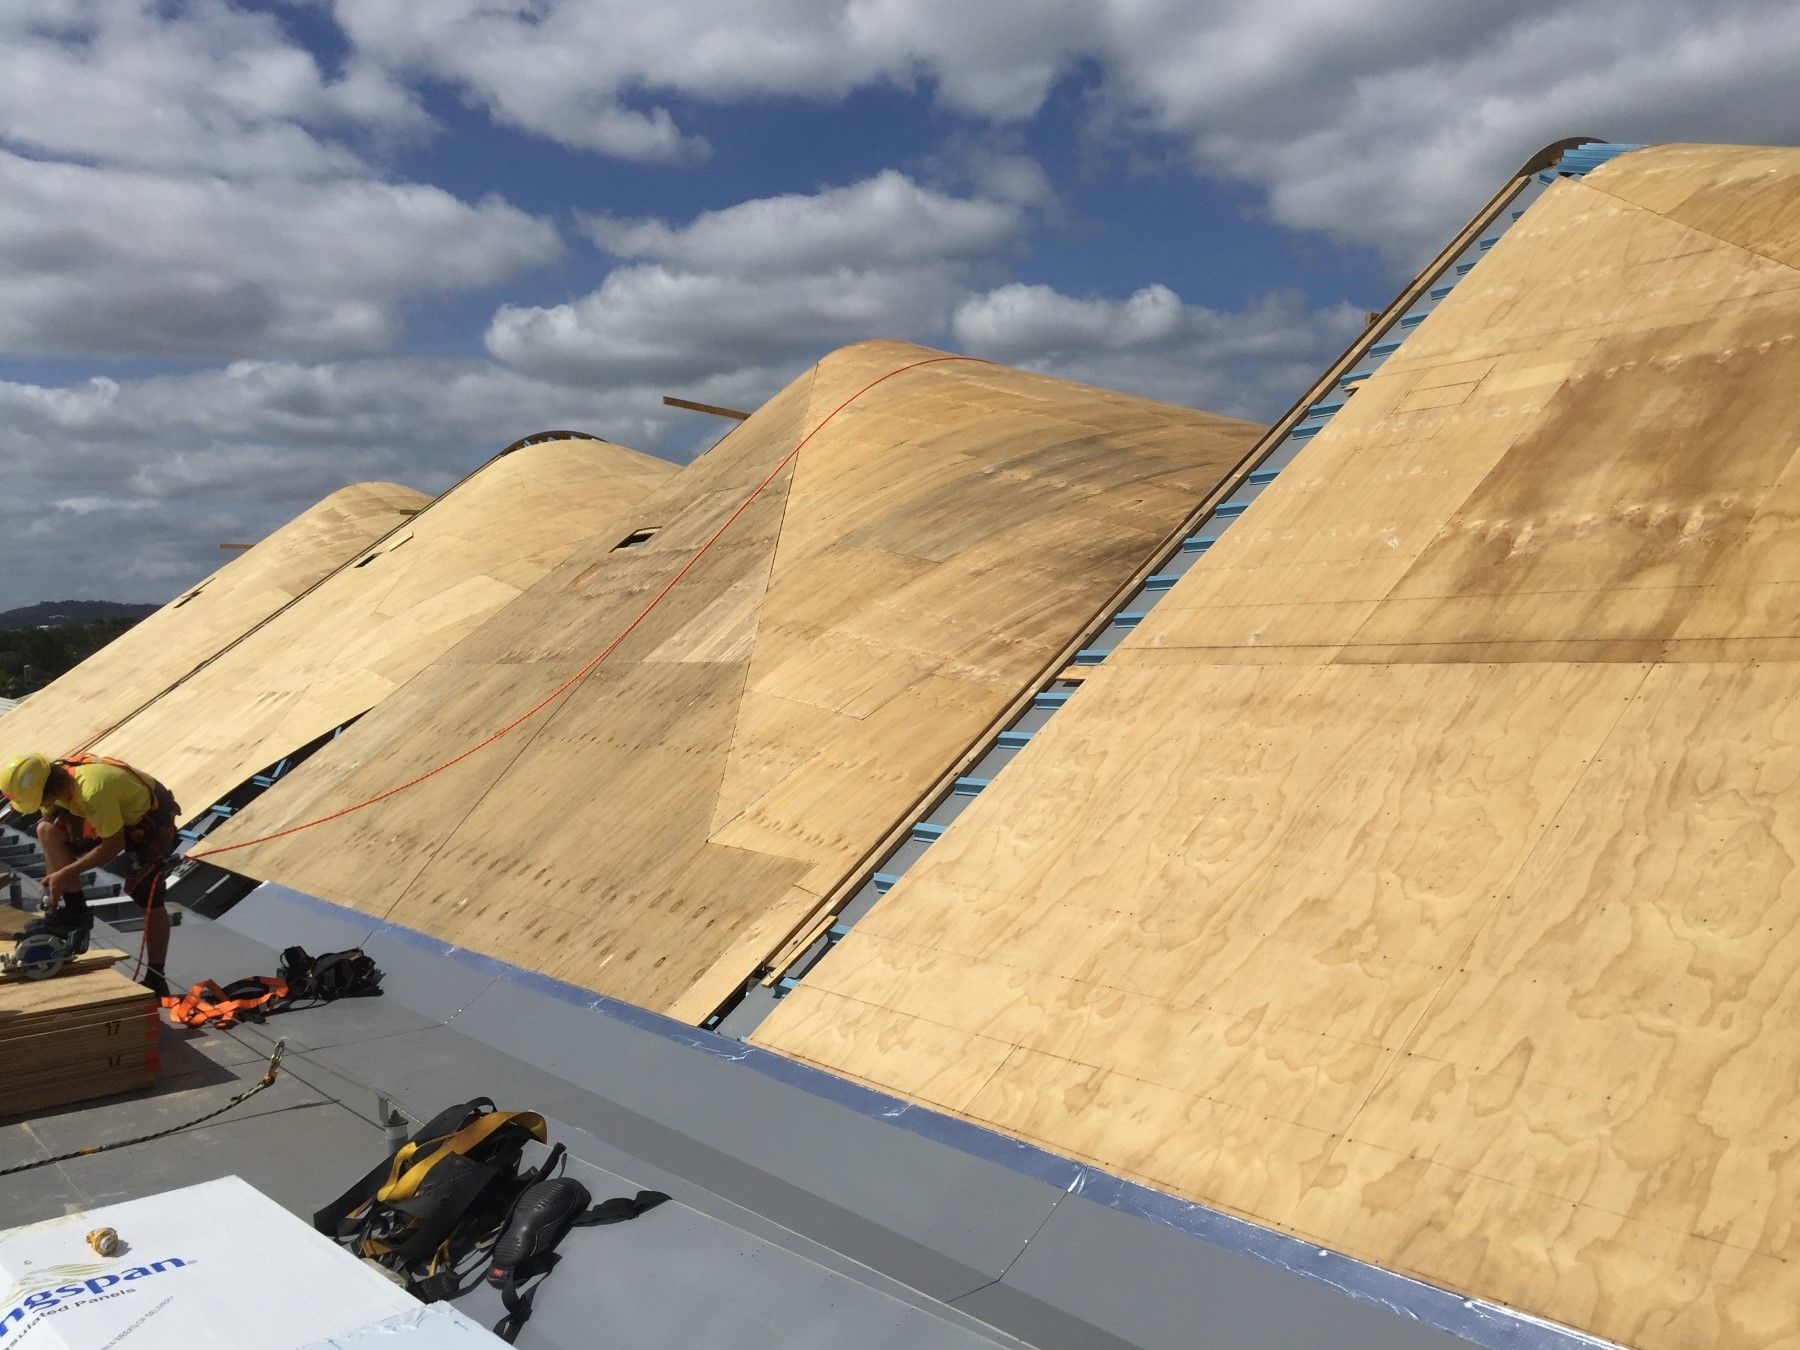 mining sector plywood, plywood brisbane, plywood flooring,  Non-Structural CD Plywood, Structural Plywood, Exterior Hardwood Plywood, Polyester Faced Plywood, and Film Faced Non-Structural Plywood.